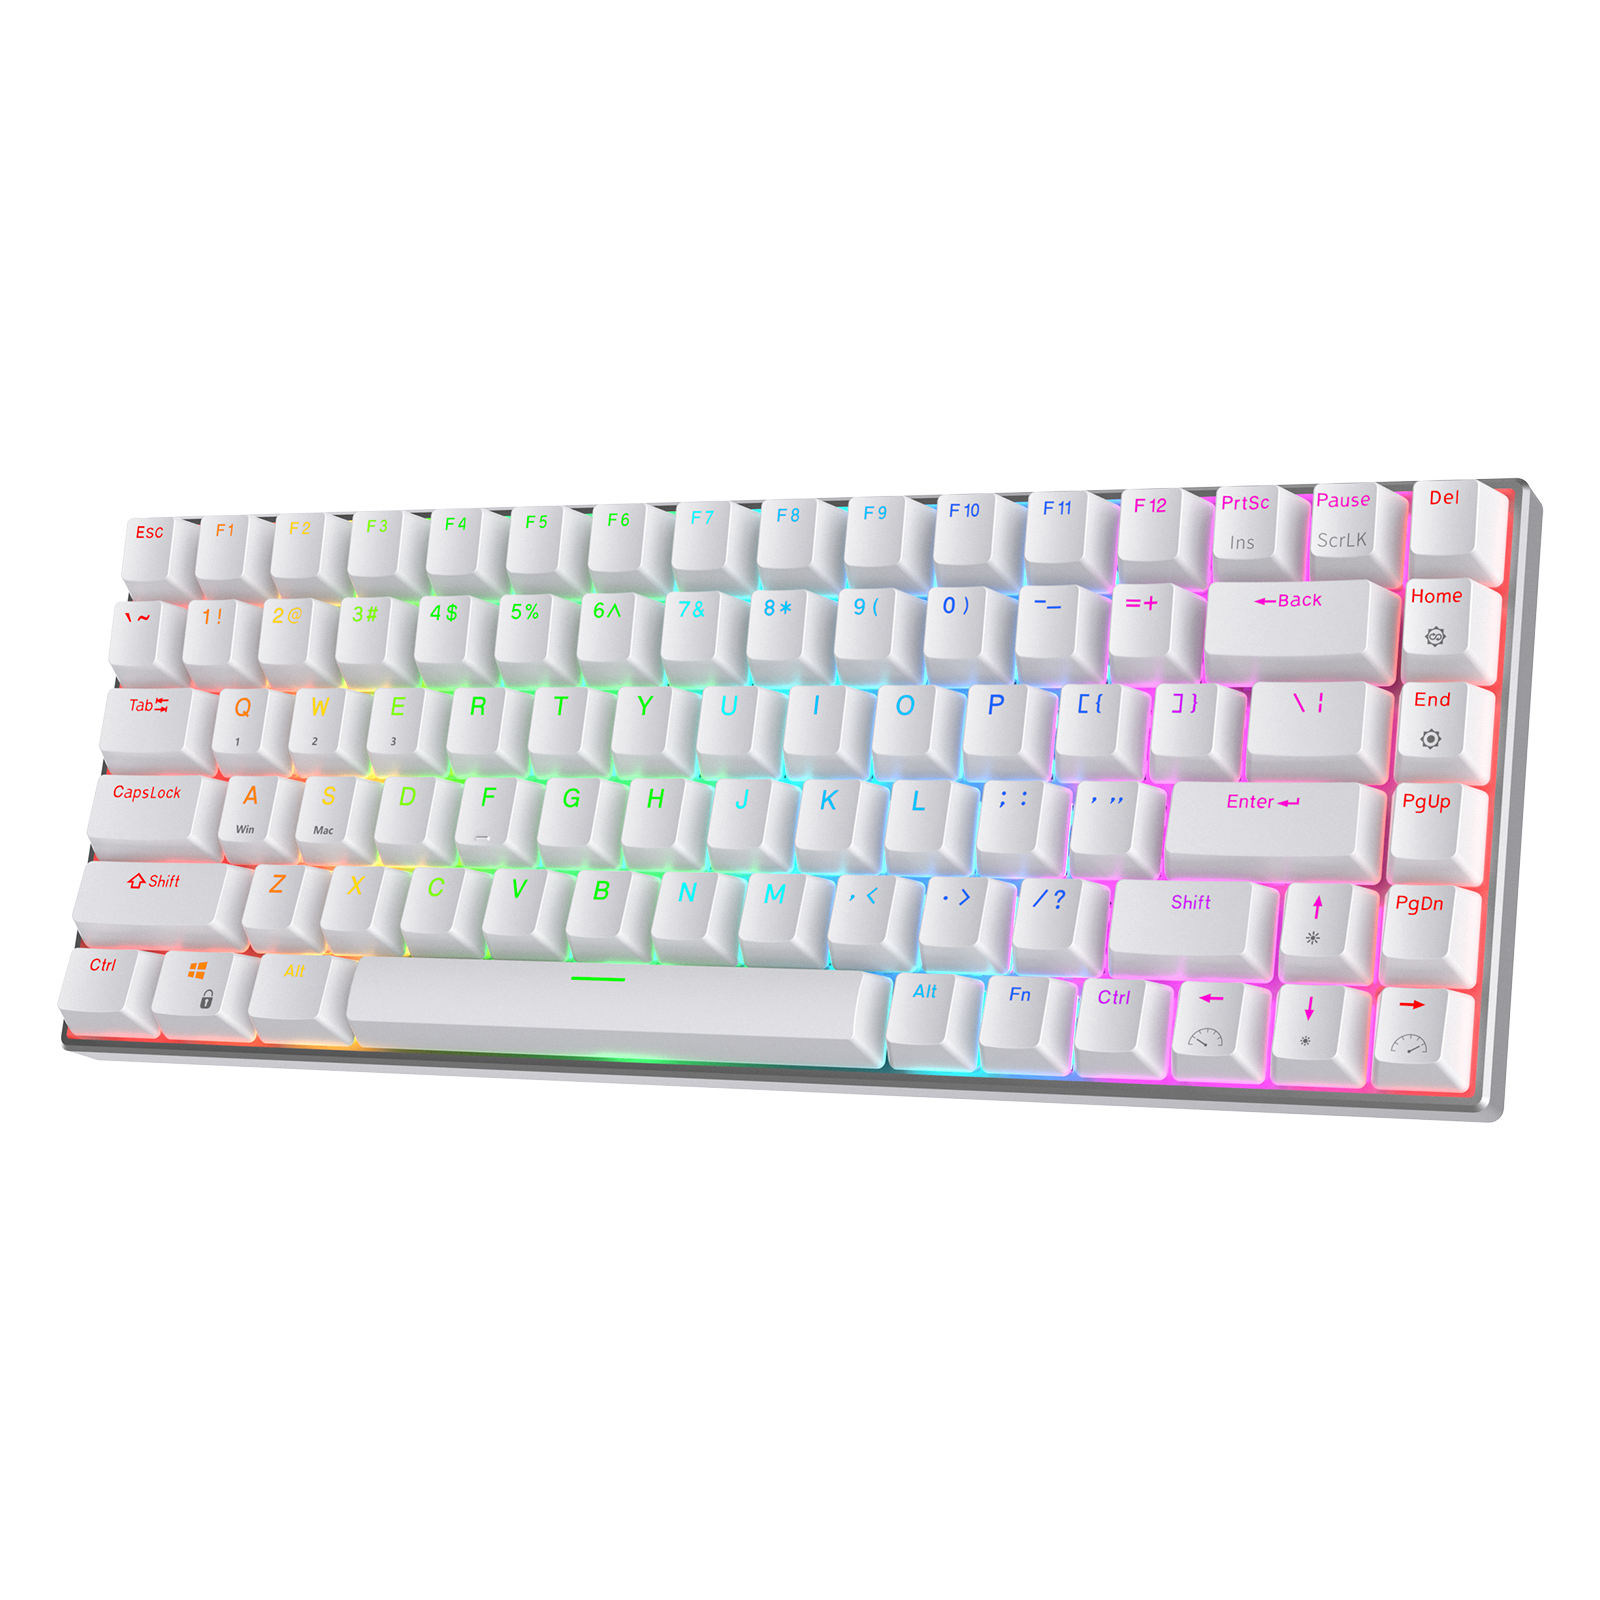 RK ROYAL KLUDGE RK84 Pro 75% RGB Triple Mode BT5.0/2.4G/Wired Hot-Swappable Mechanical Keyboard with Aluminum Frame, Tactile Brown Switch 